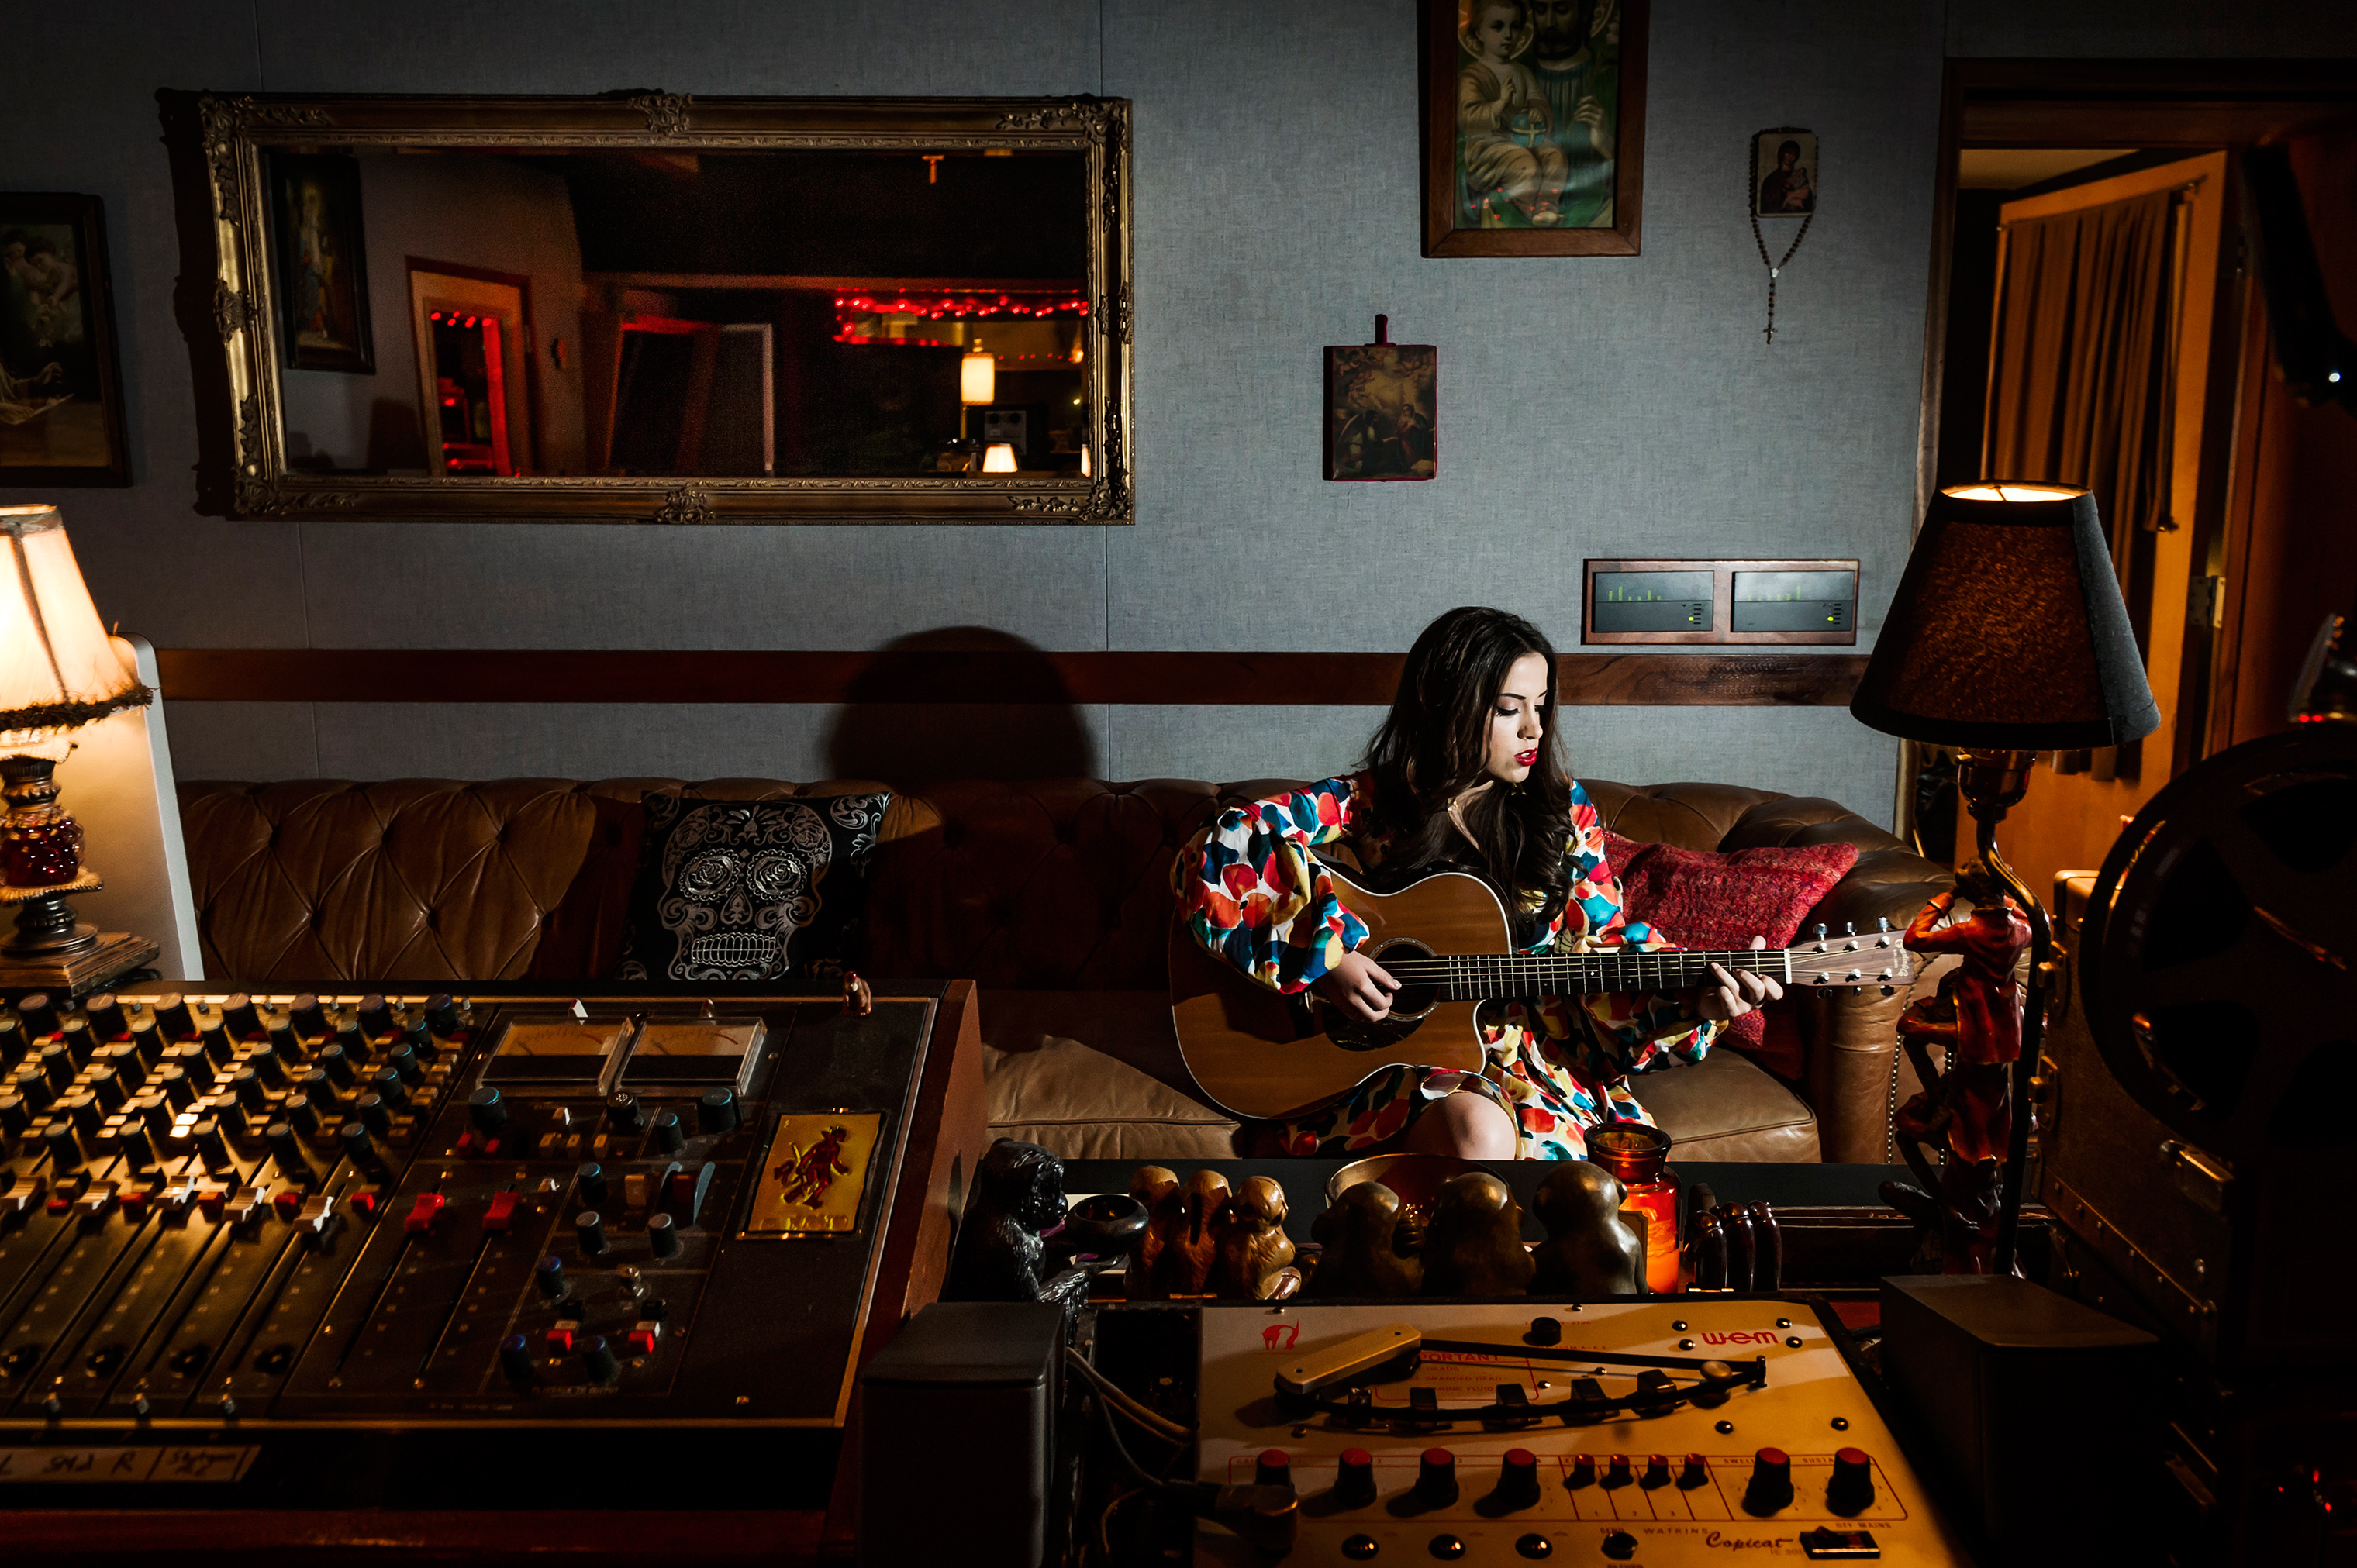 "Nothing feels better than when a song authentically represents what you’re feeling, but you weren’t able to put it into words,” Chapman says in the recording studio. (Dina Litovsky—Redux for TIME)